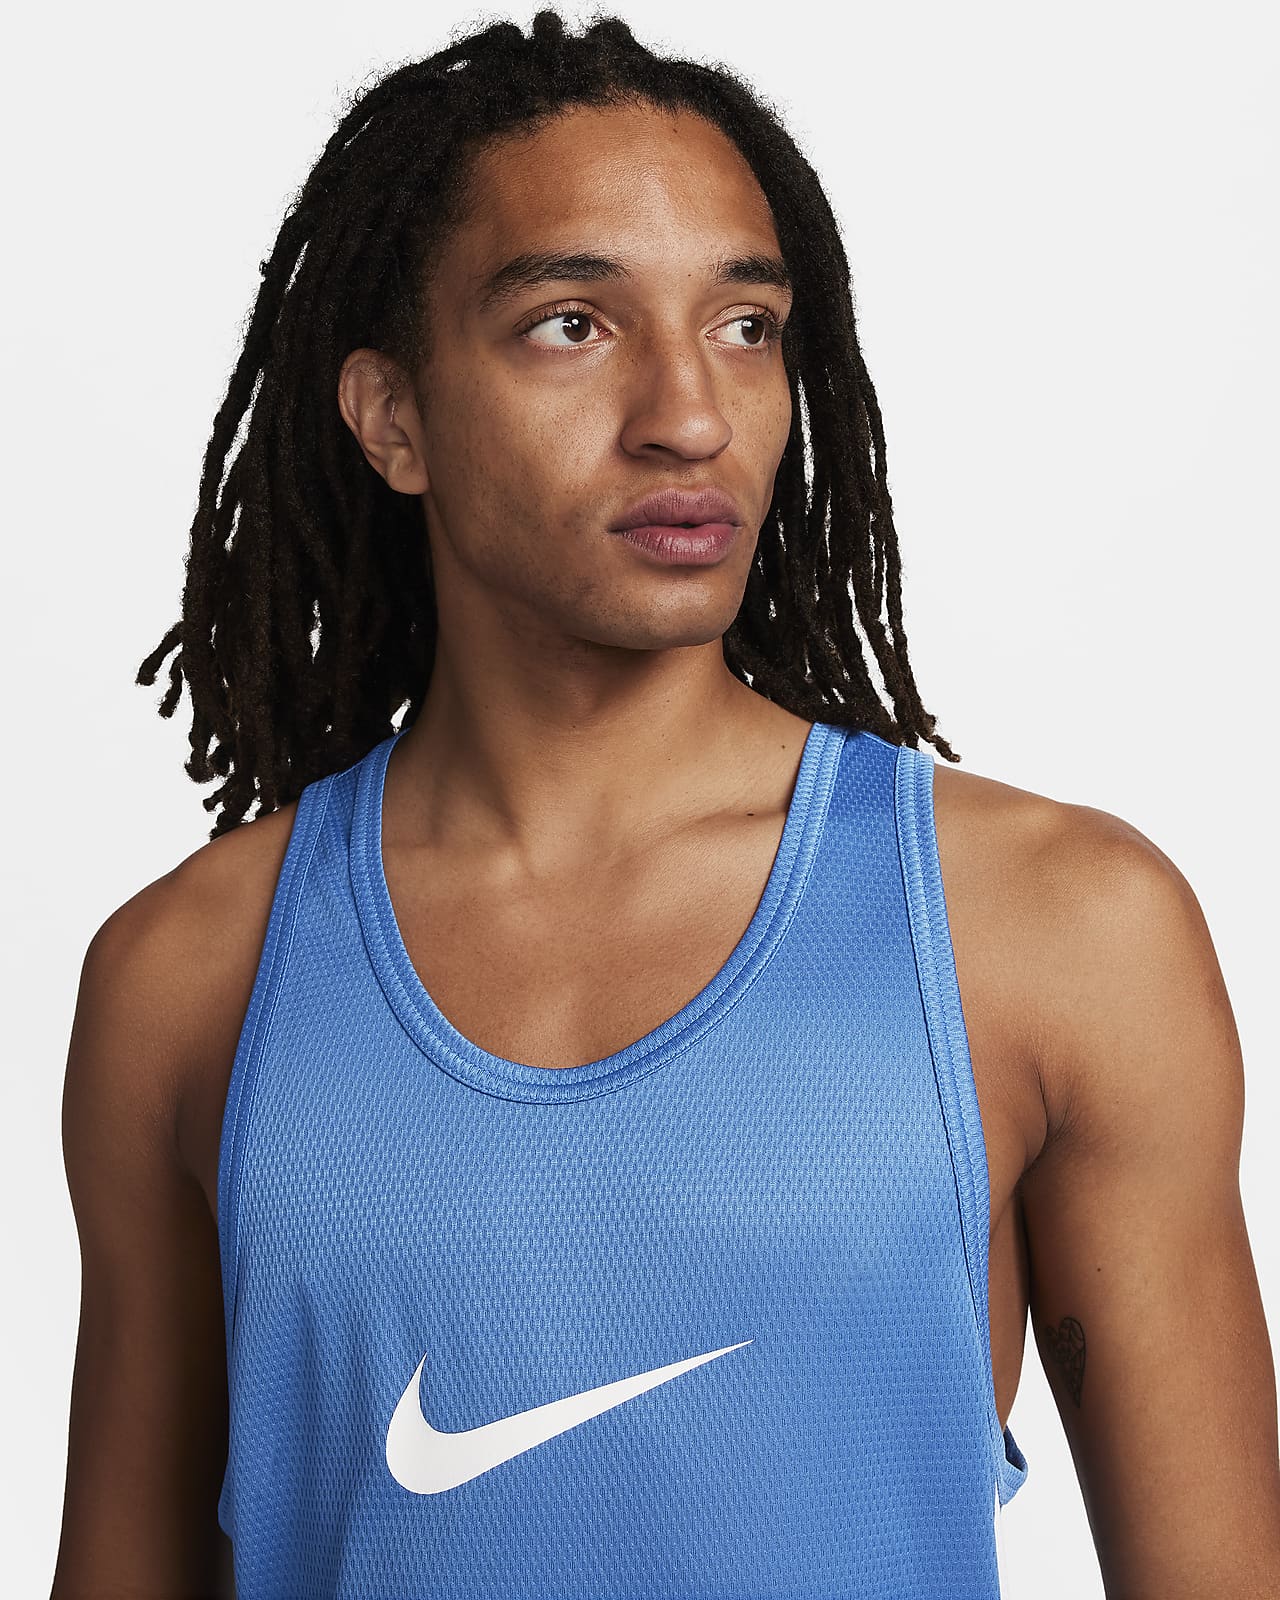 Maillot De Basketball Homme Dri-FIT Icon NIKE